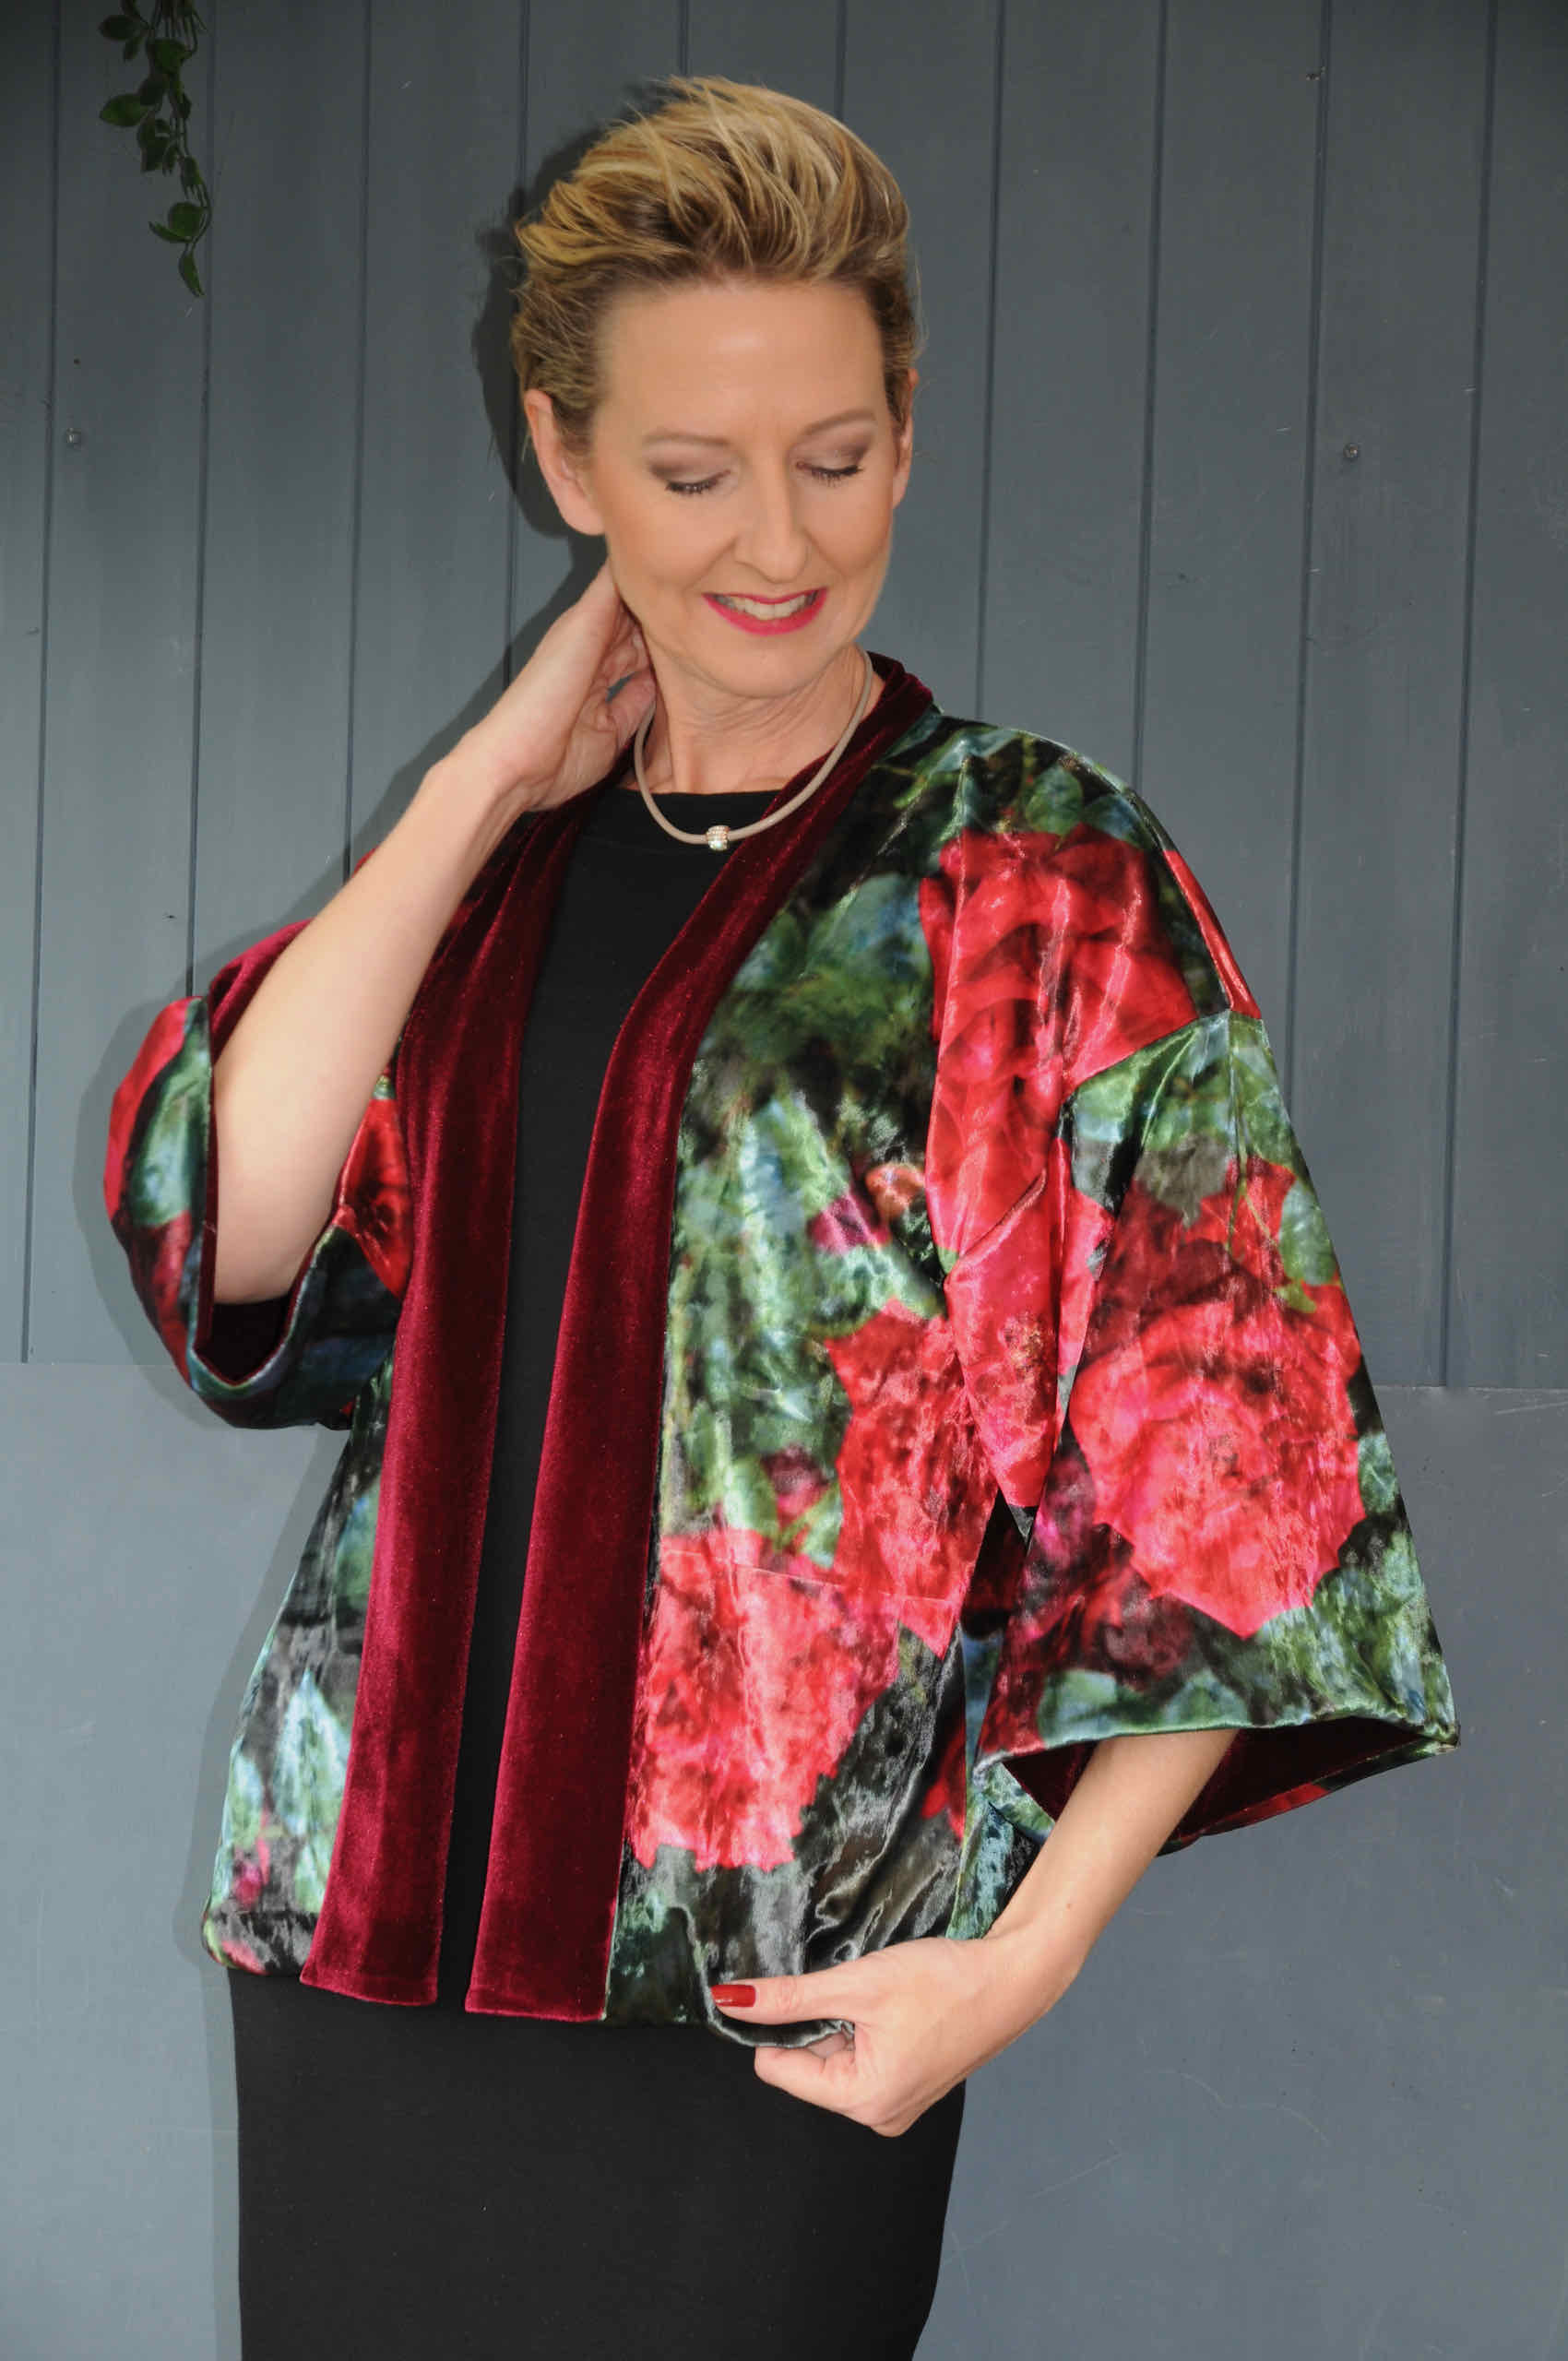 From My Mothers Garden roses reversible jacket&shrug.ROS1